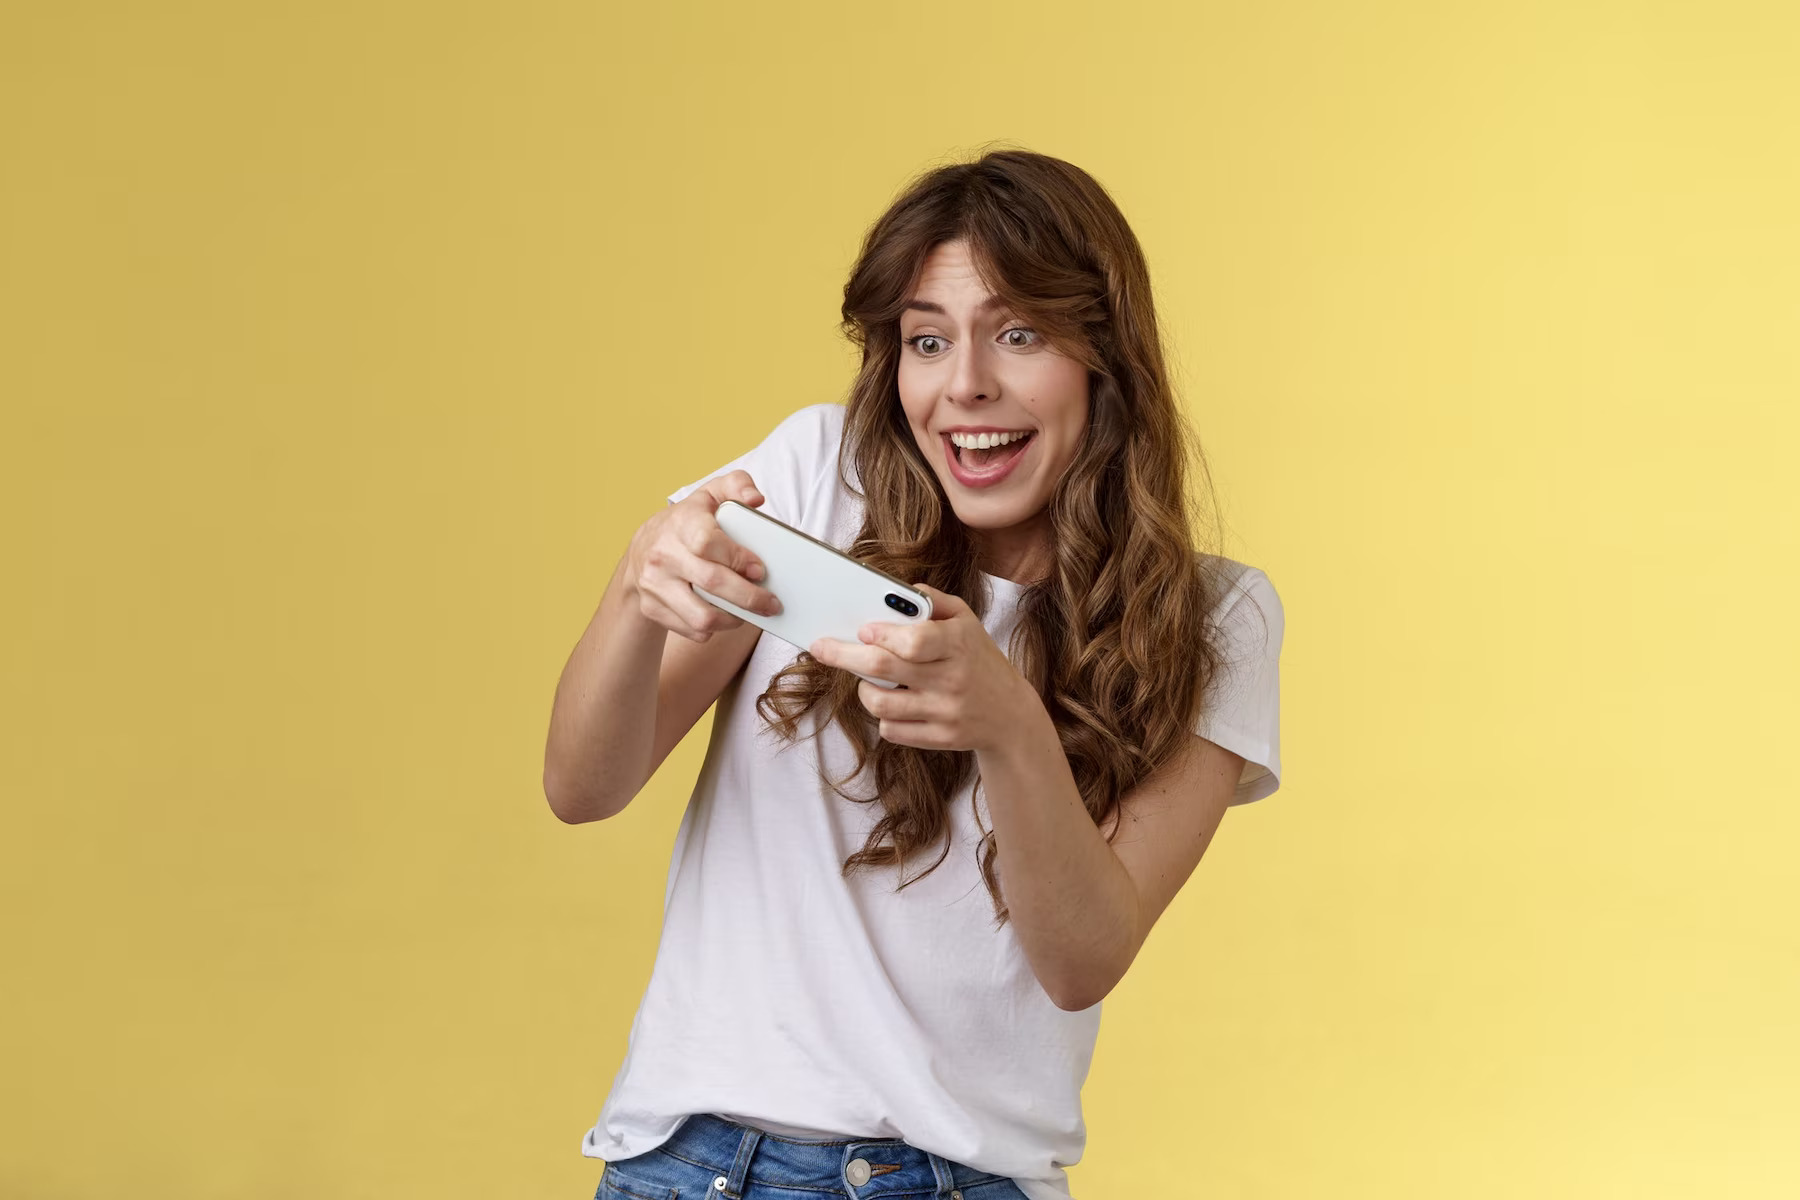 Mobile gamer delighted by the gaming experience